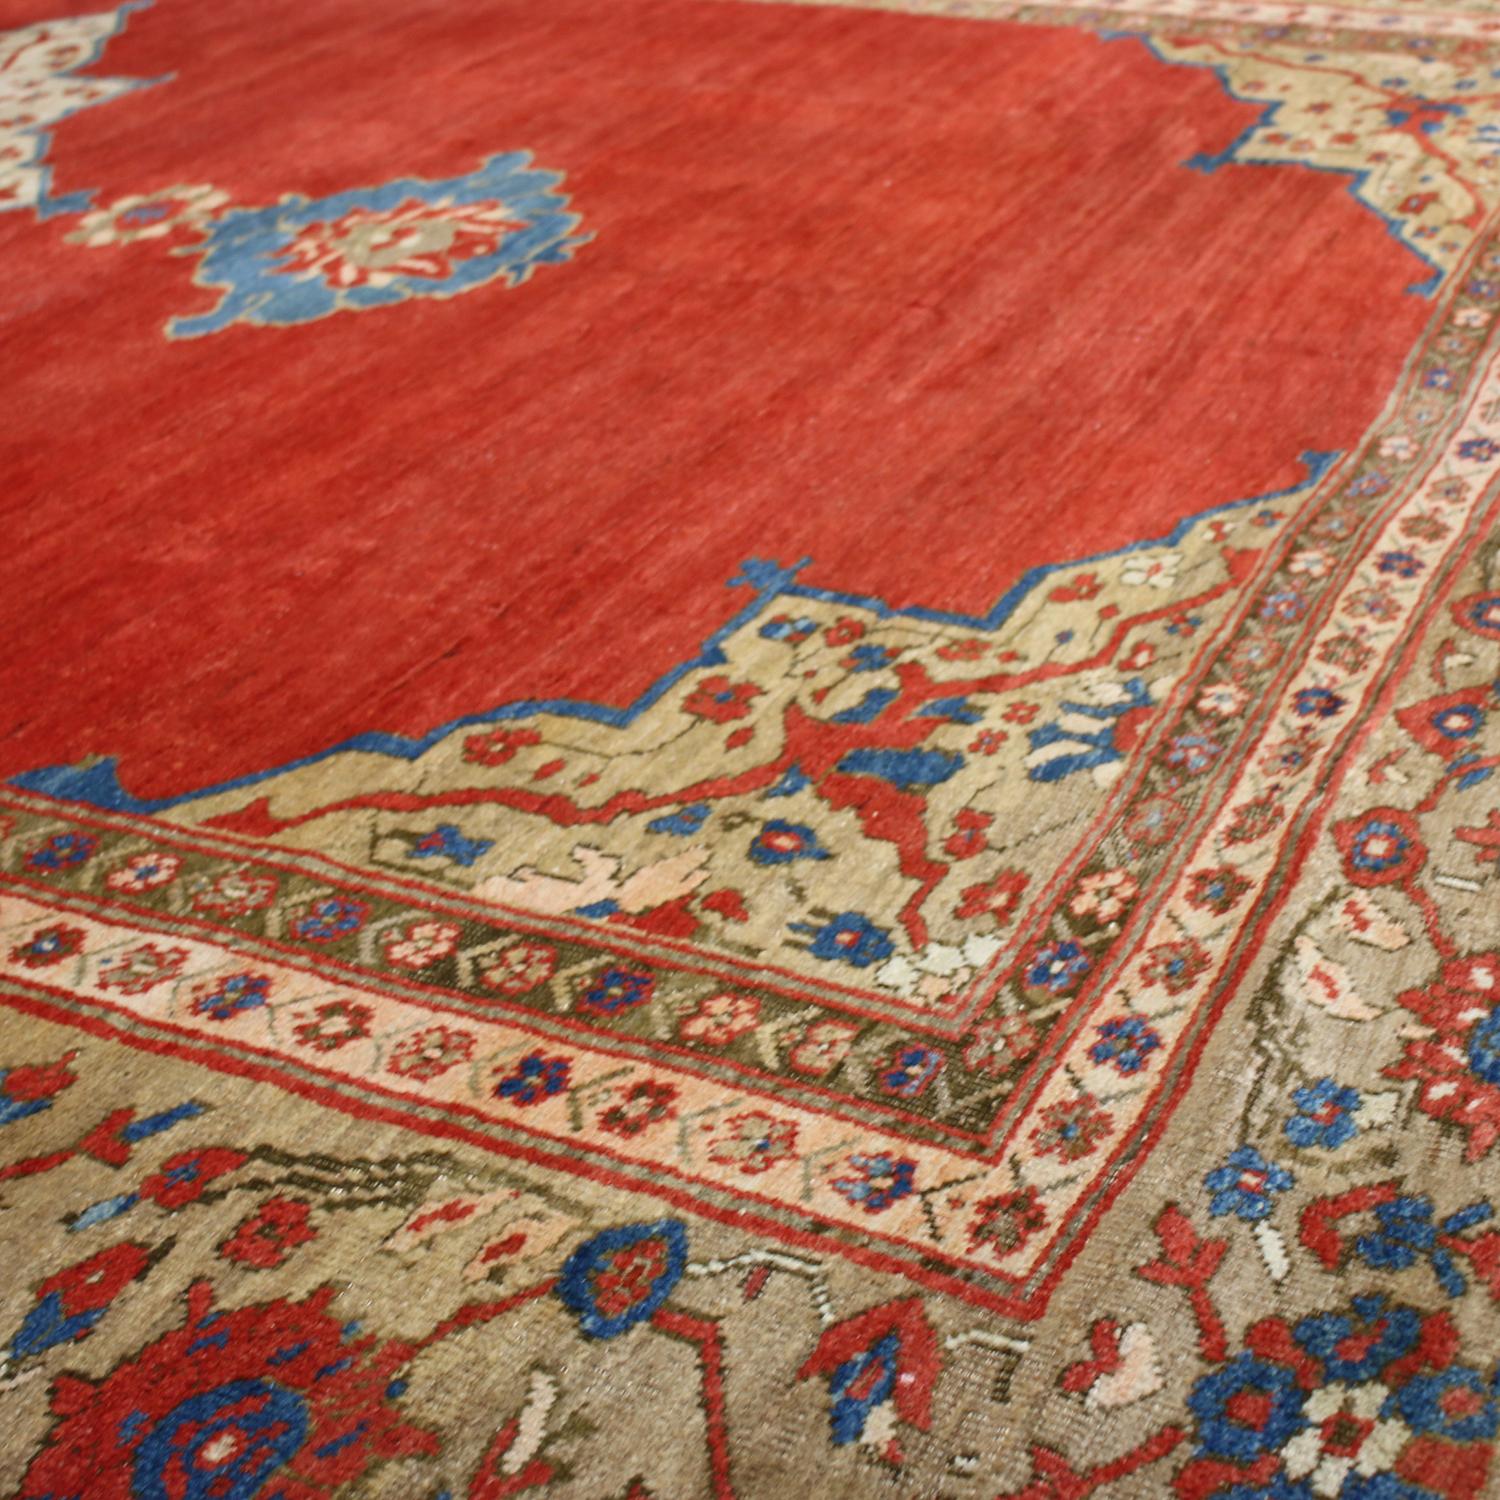 Hand knotted in high-quality wool originating from Persia in 1880, this antique geometric Sultanabad rug hails from one of the most widely regarded cities of antique weaving, enjoying an exceptionally fine medallion field design complementing a